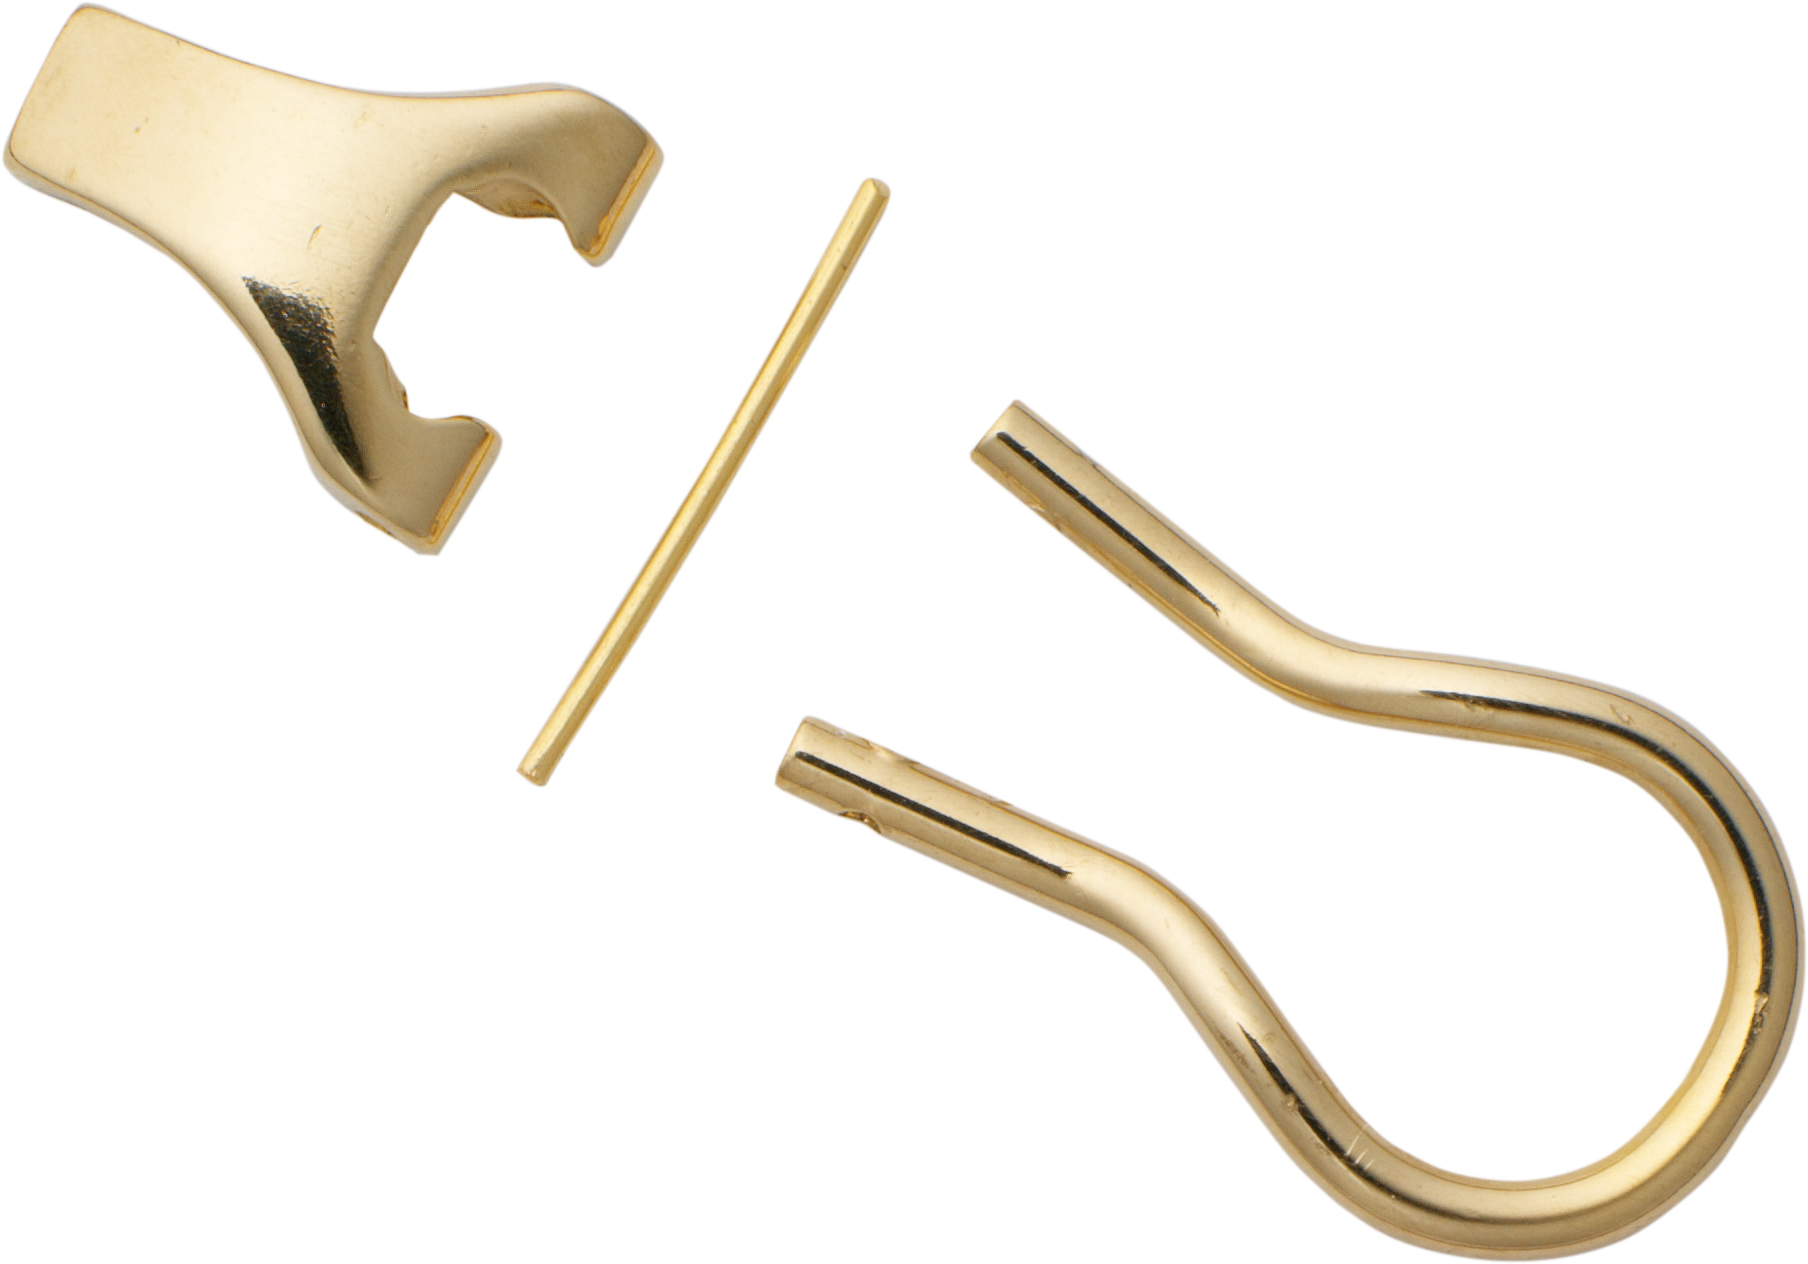 Ear clip mechanism gold 750/-Gg with die cast lug height 6.50mm clip length 14.50mm